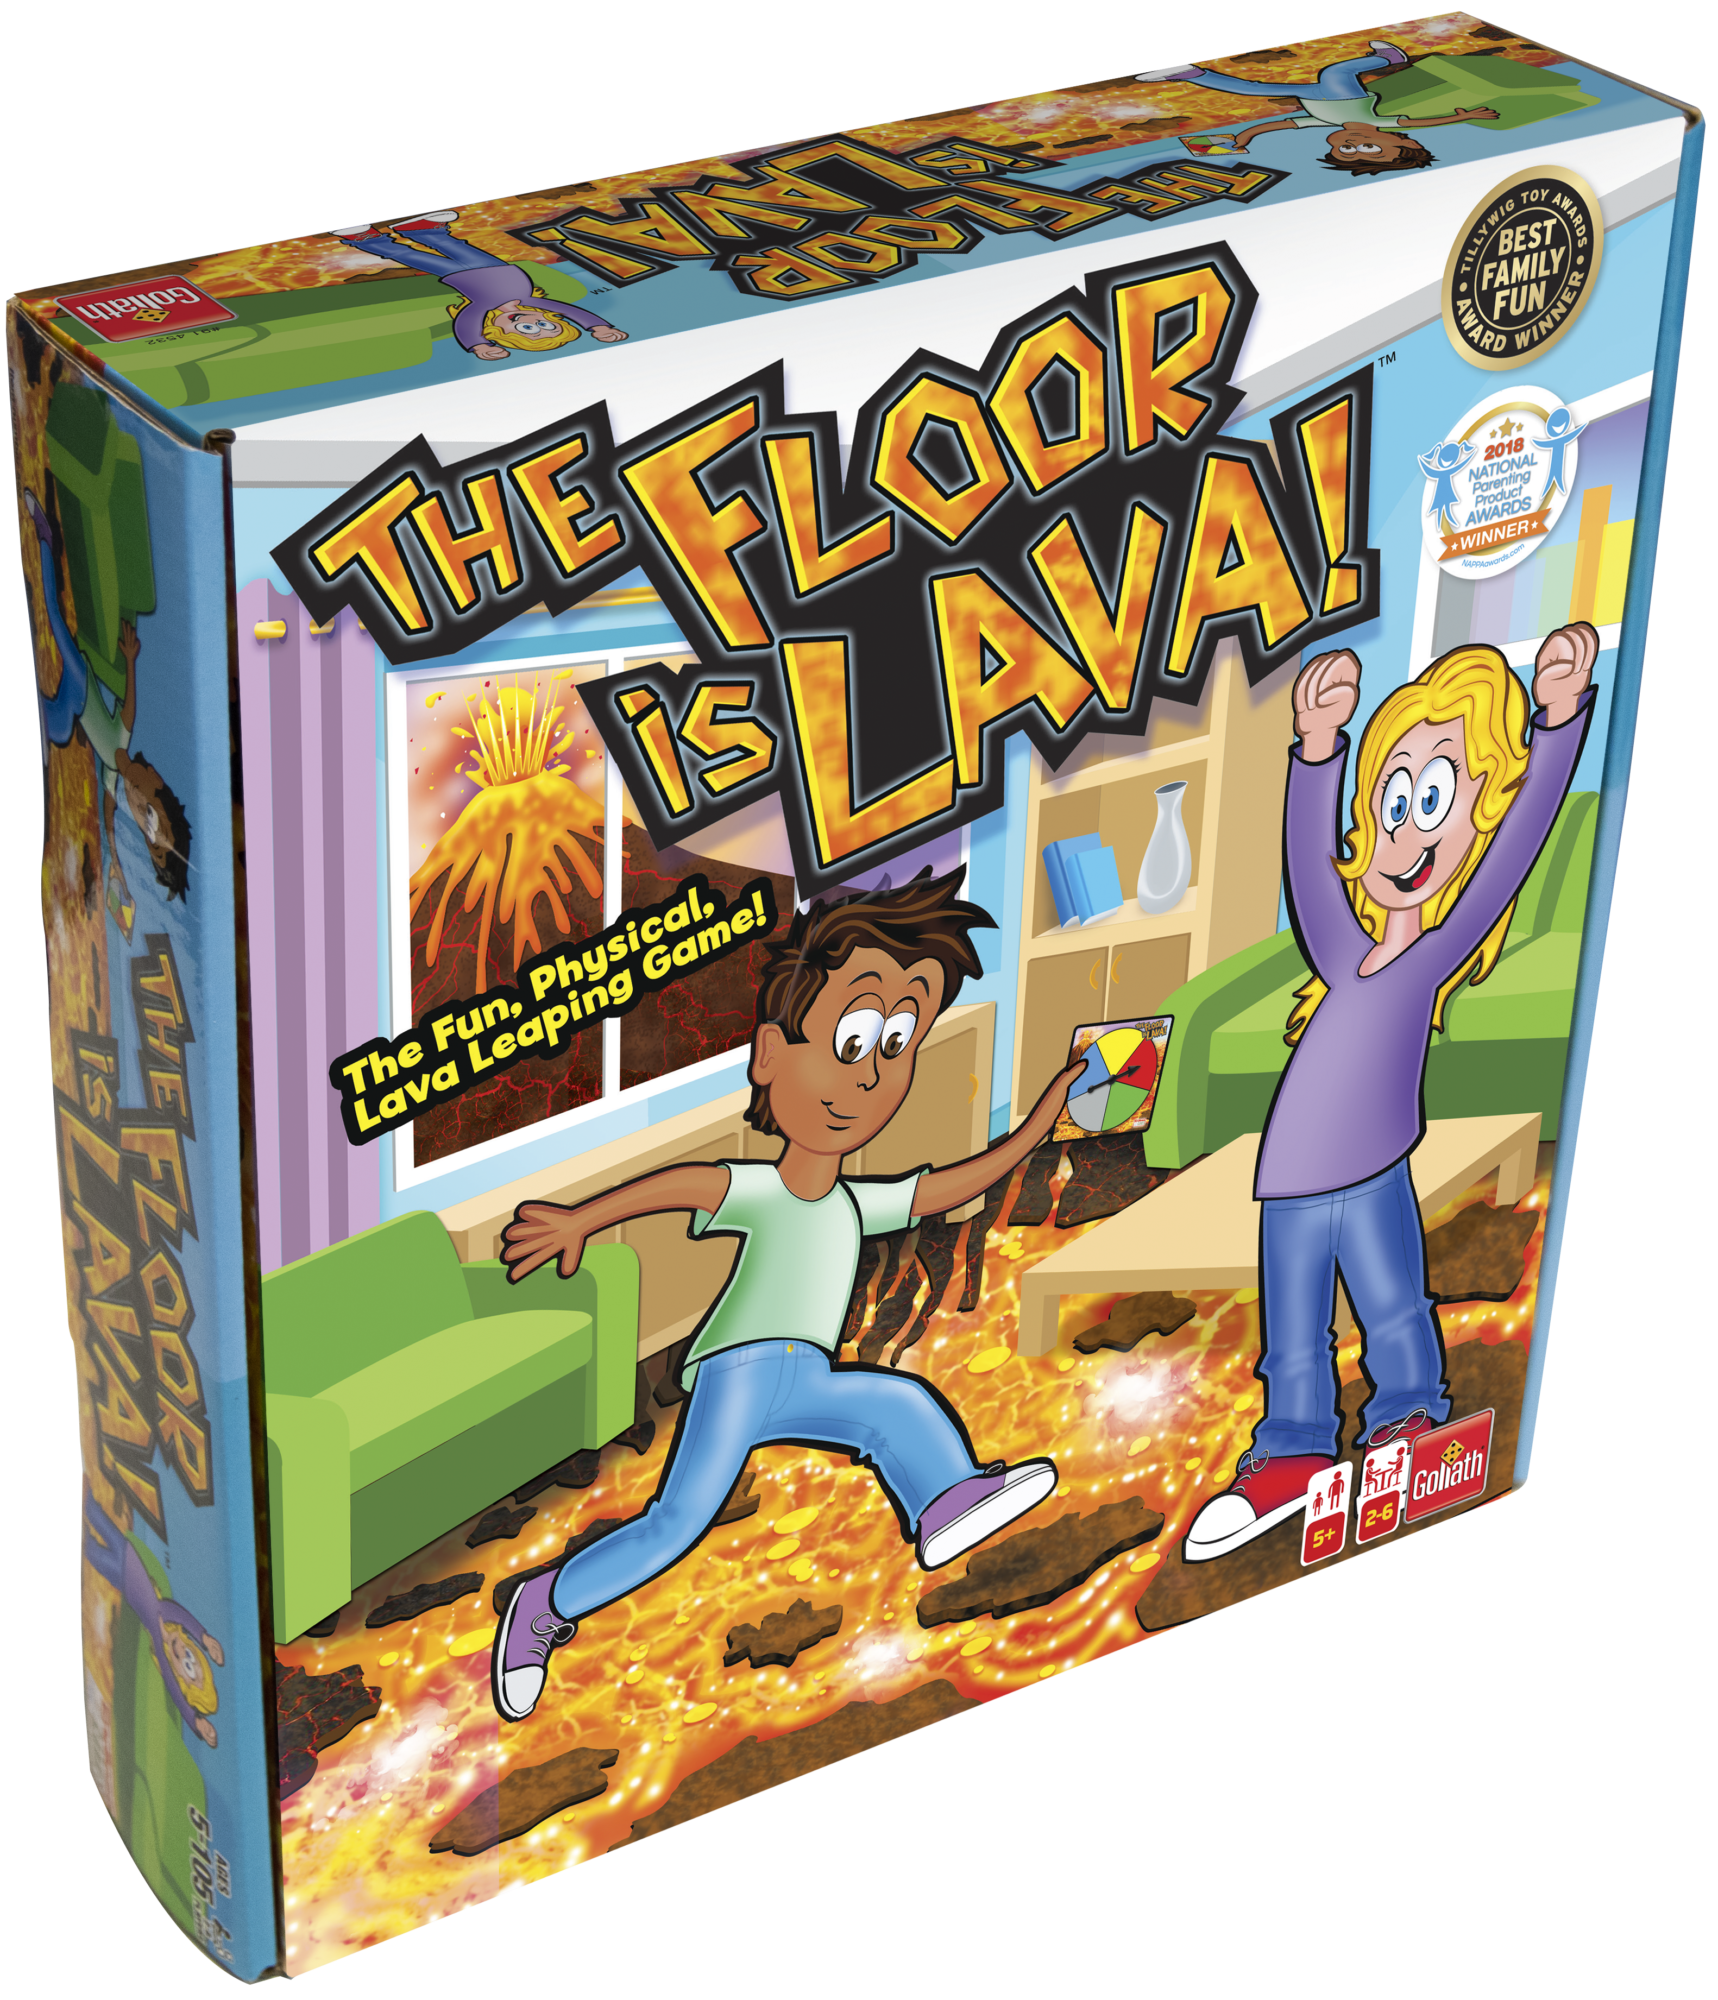 The Floor is Lava game box